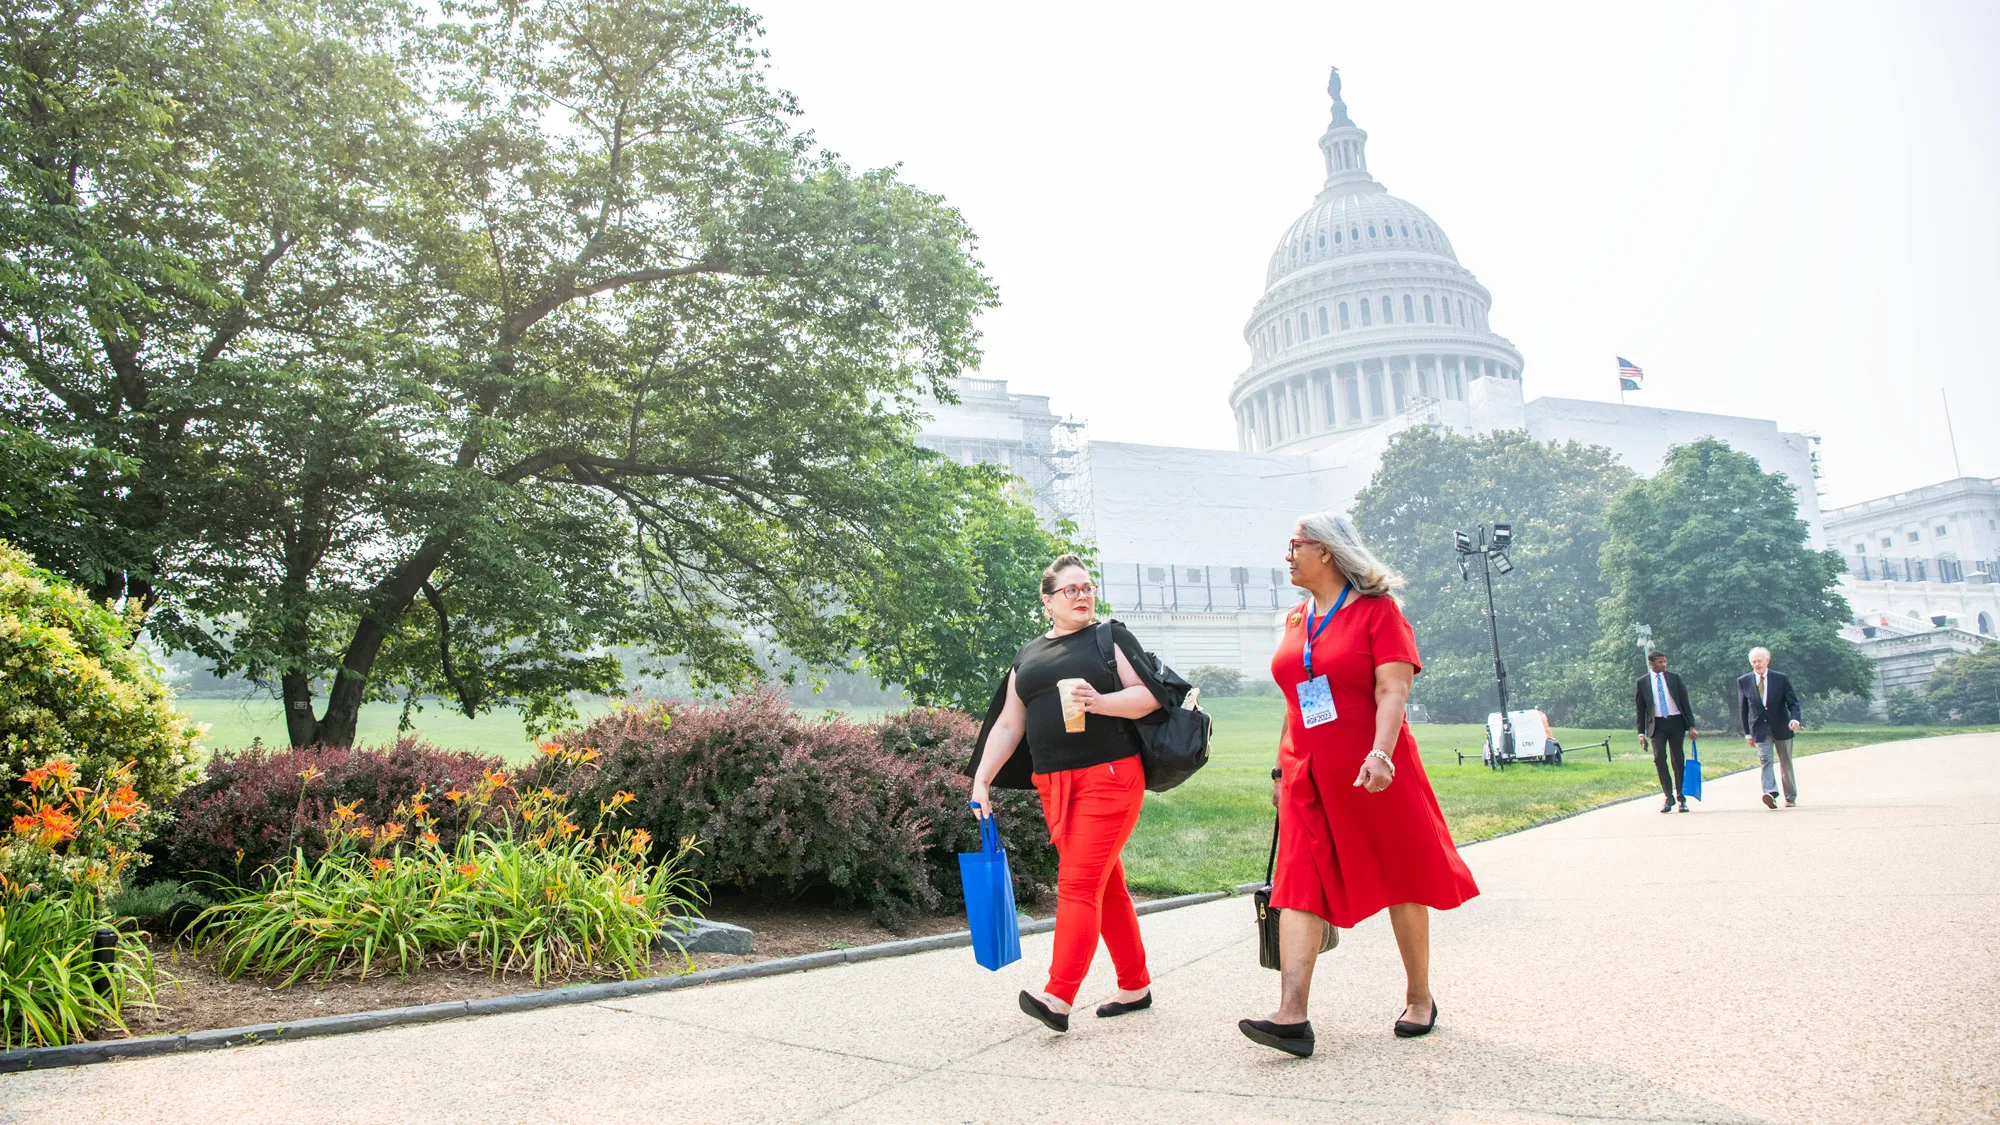 Carrying a coffee and a couple of tote bags, Gretchen Klingler walks outside the U.S. Capitol building with an older woman whose gray hair is blowing behind her. They’re looking at each other, both through red glasses that match the woman’s dress and Gretchen’s pants. The day is hazy, making the sky look only a slightly lighter shade than the capitol dome. 